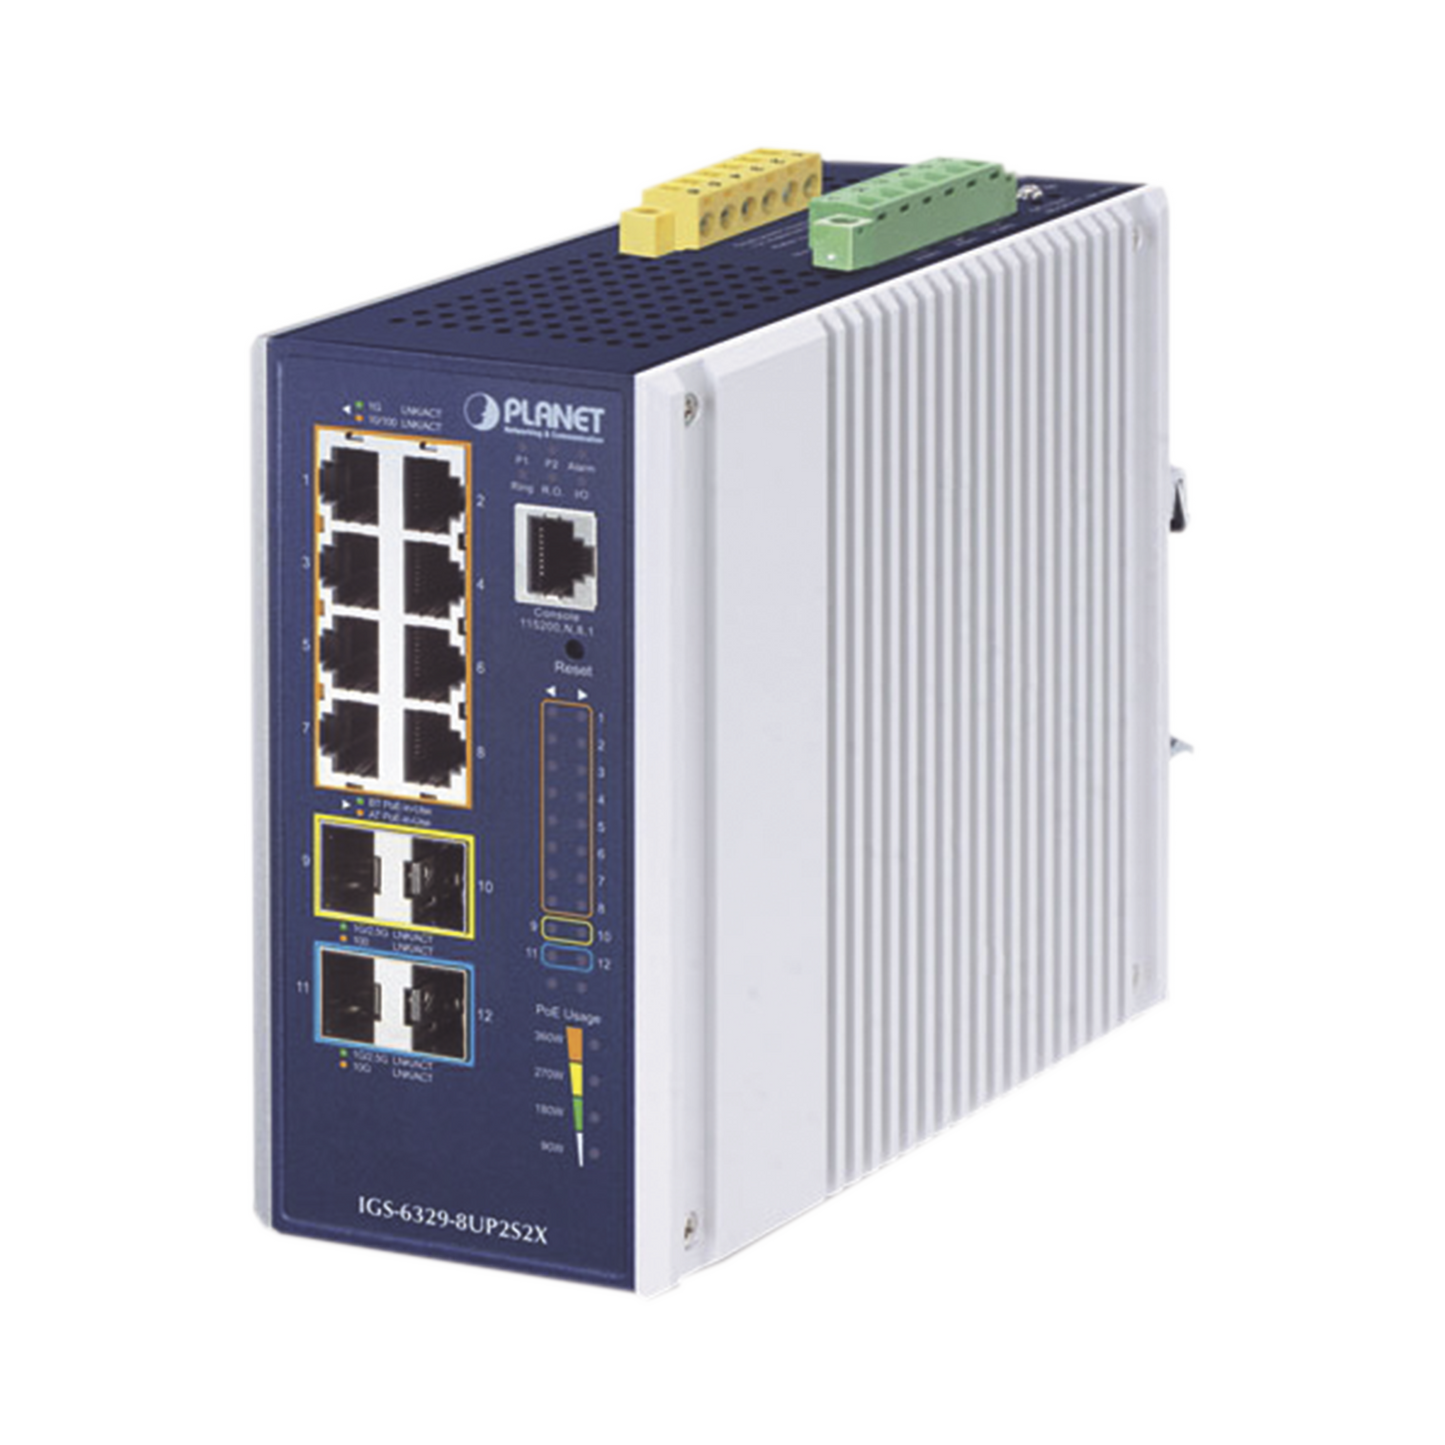 Industrial Layer 3 Managed Switch, With 8 Gigabit 802.3bt PoE Ports, 2 1G/2.5G SFP Ports, 2 10G SFP Ports